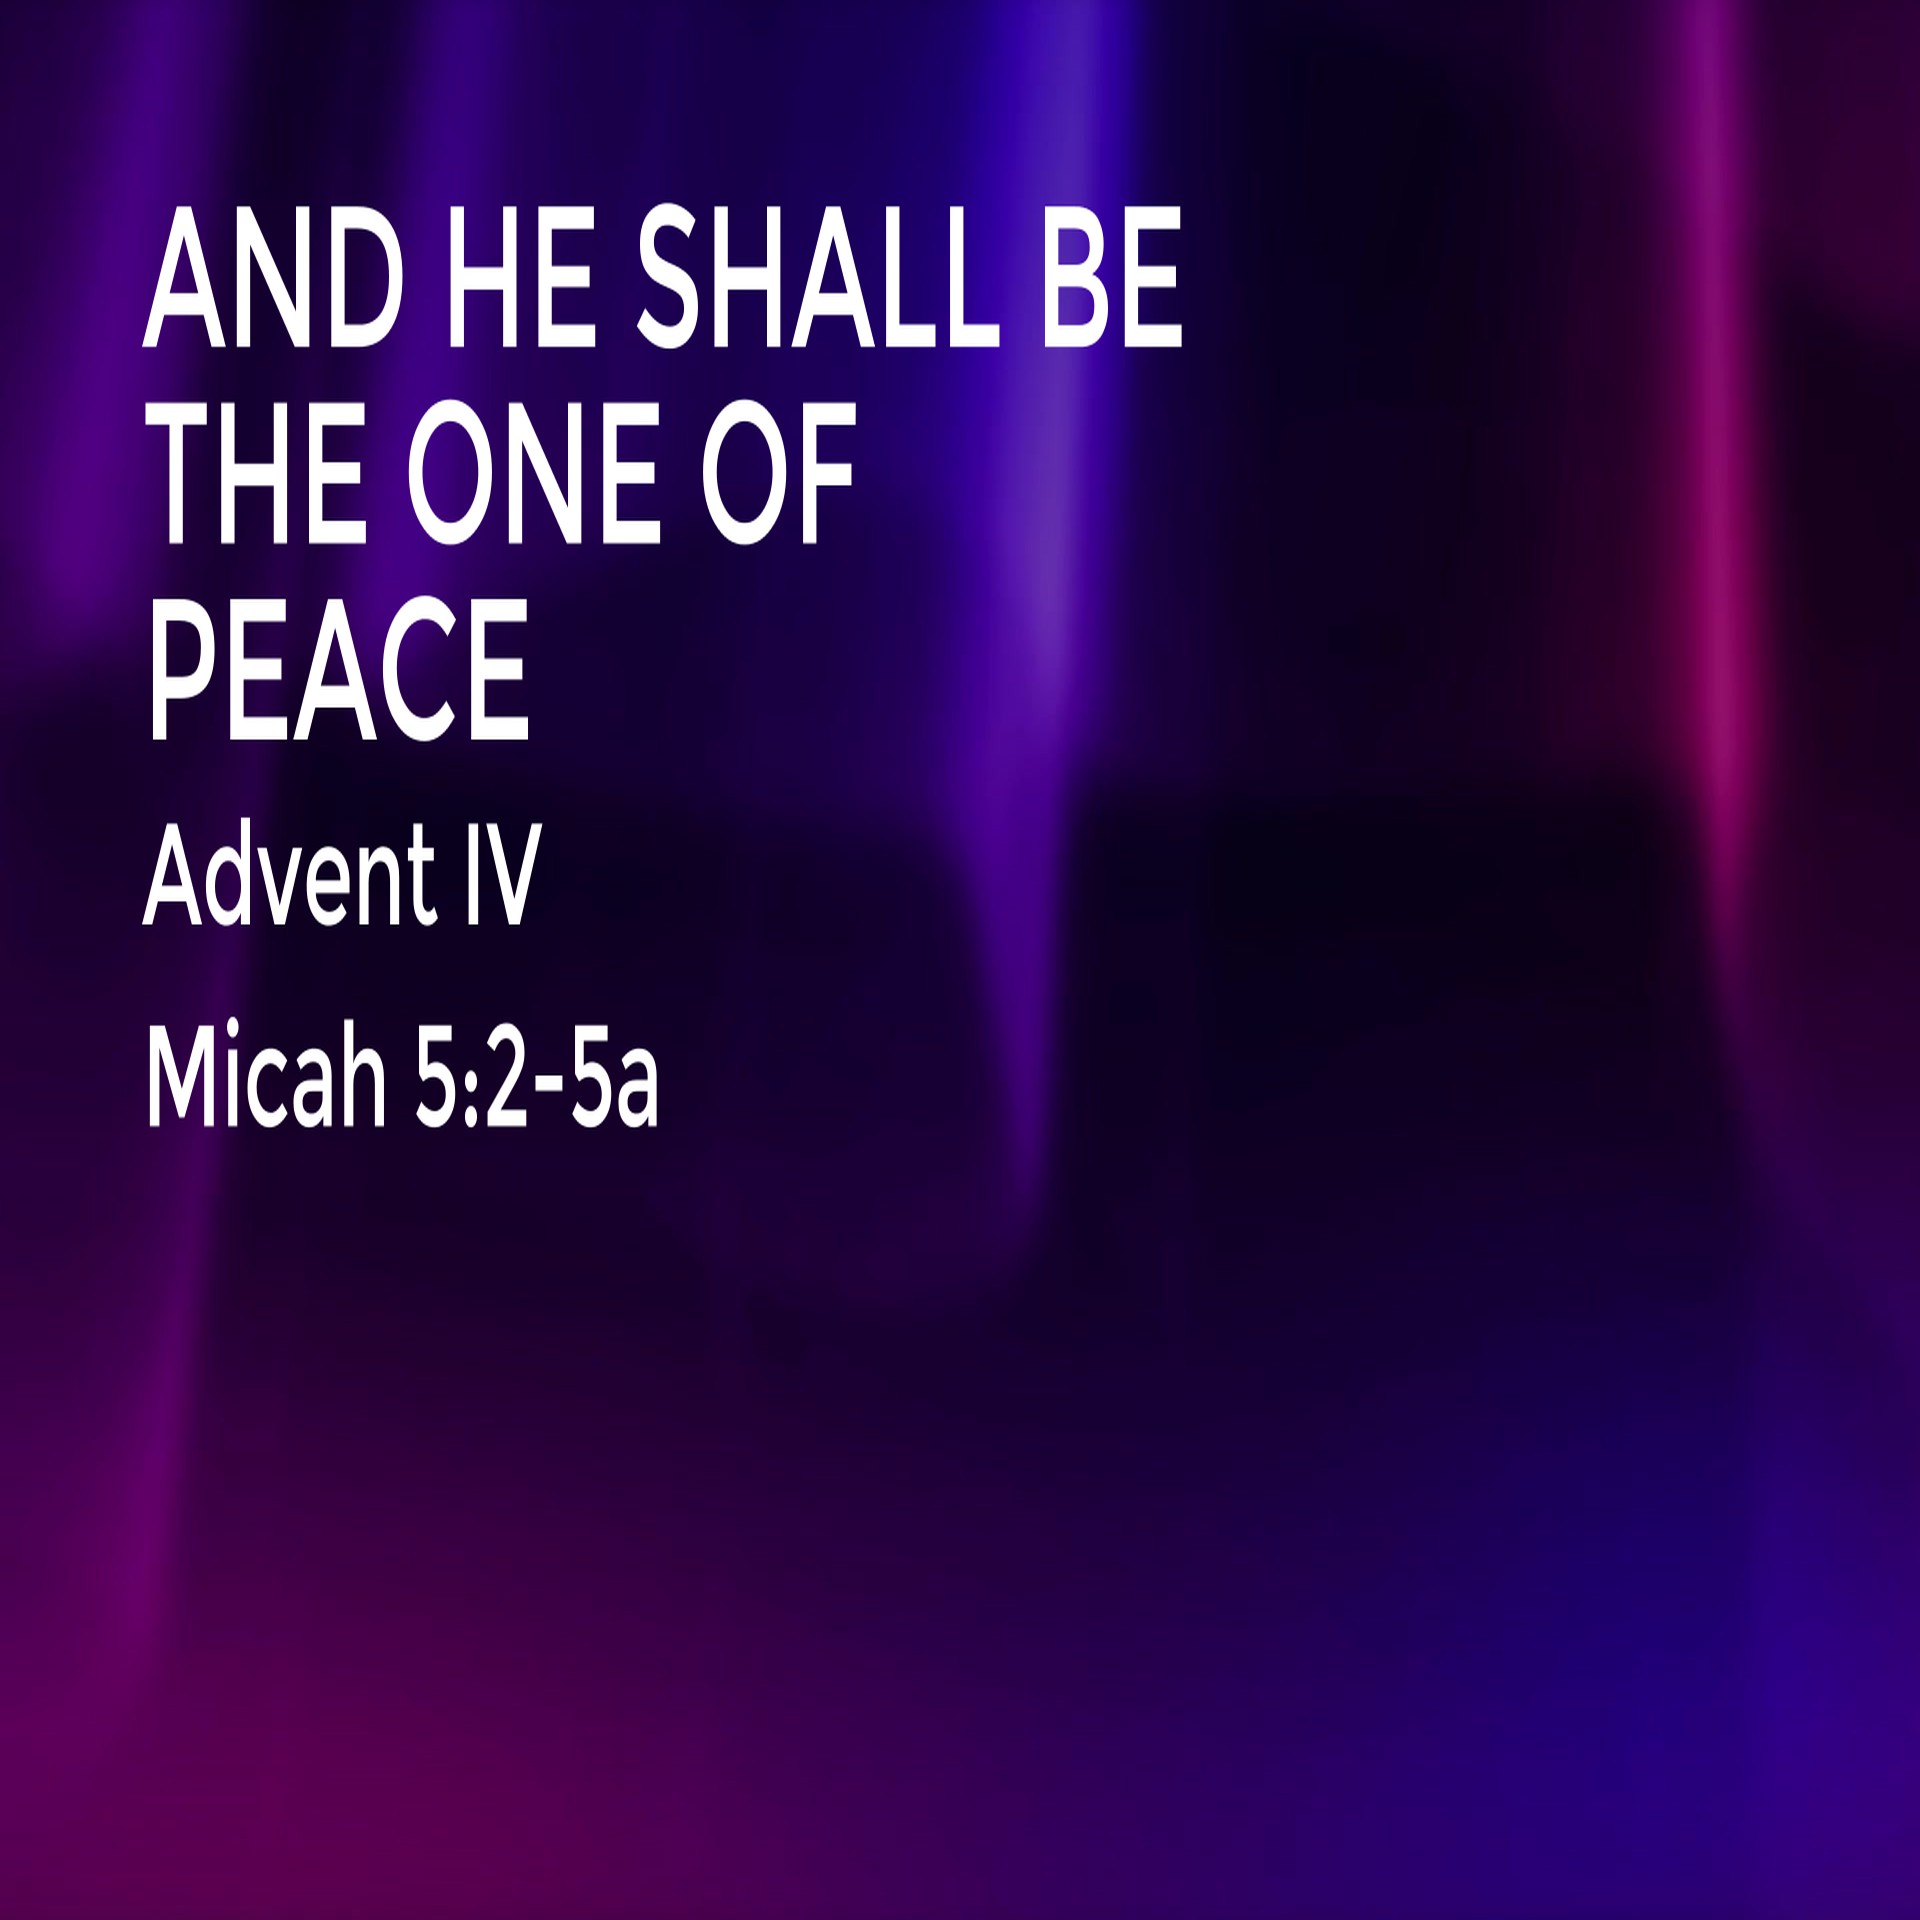 SERMON - And He Shall Be the One of Peace